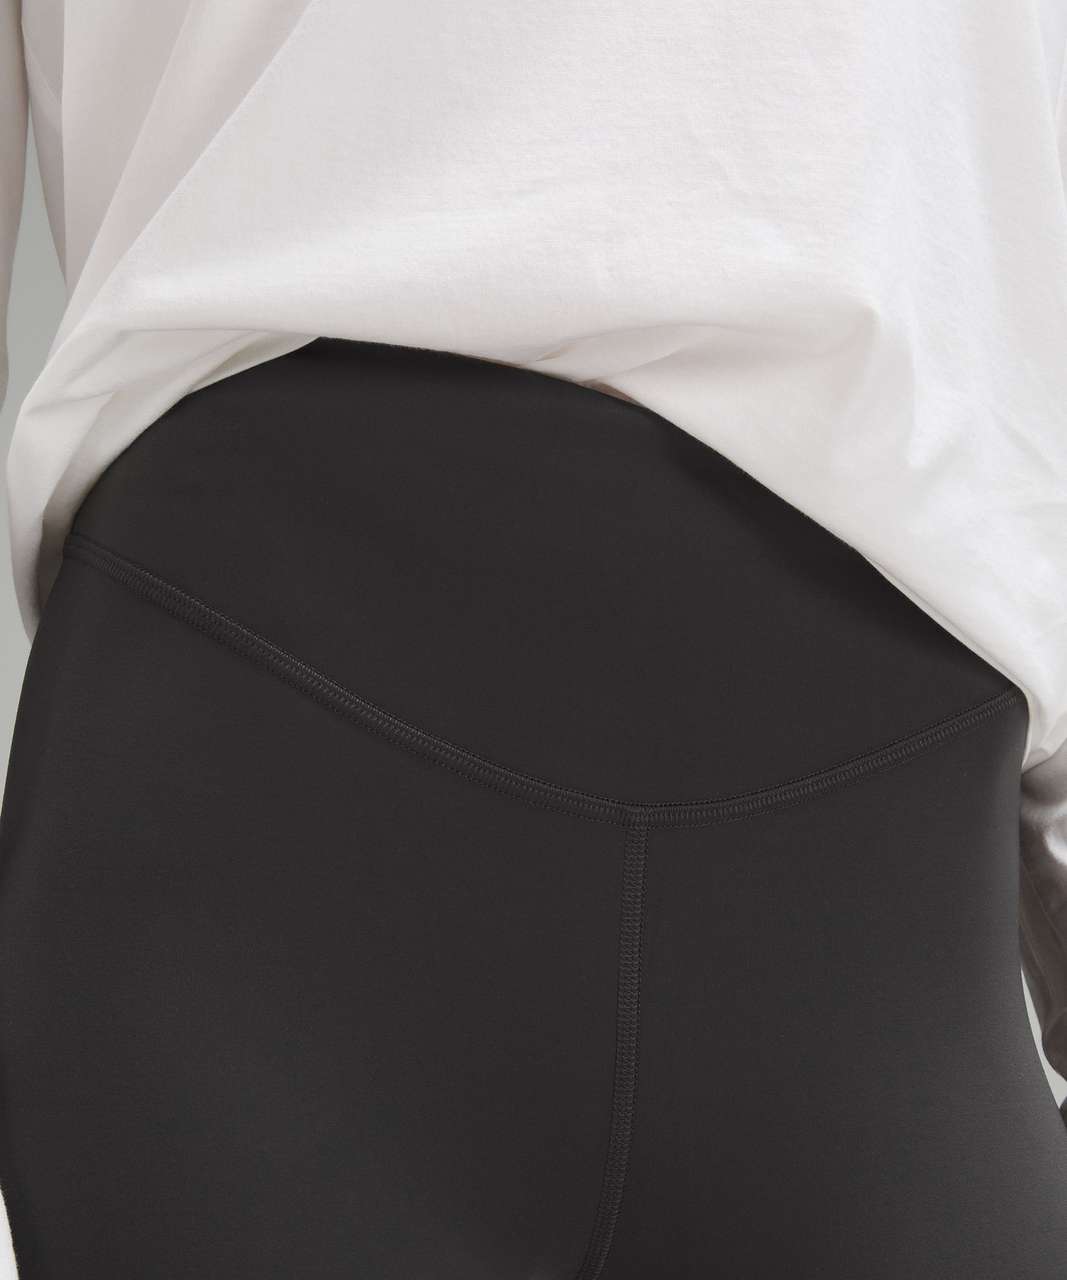 Lululemon Wunder Under SmoothCover High-Rise Tight 25" - Graphite Grey